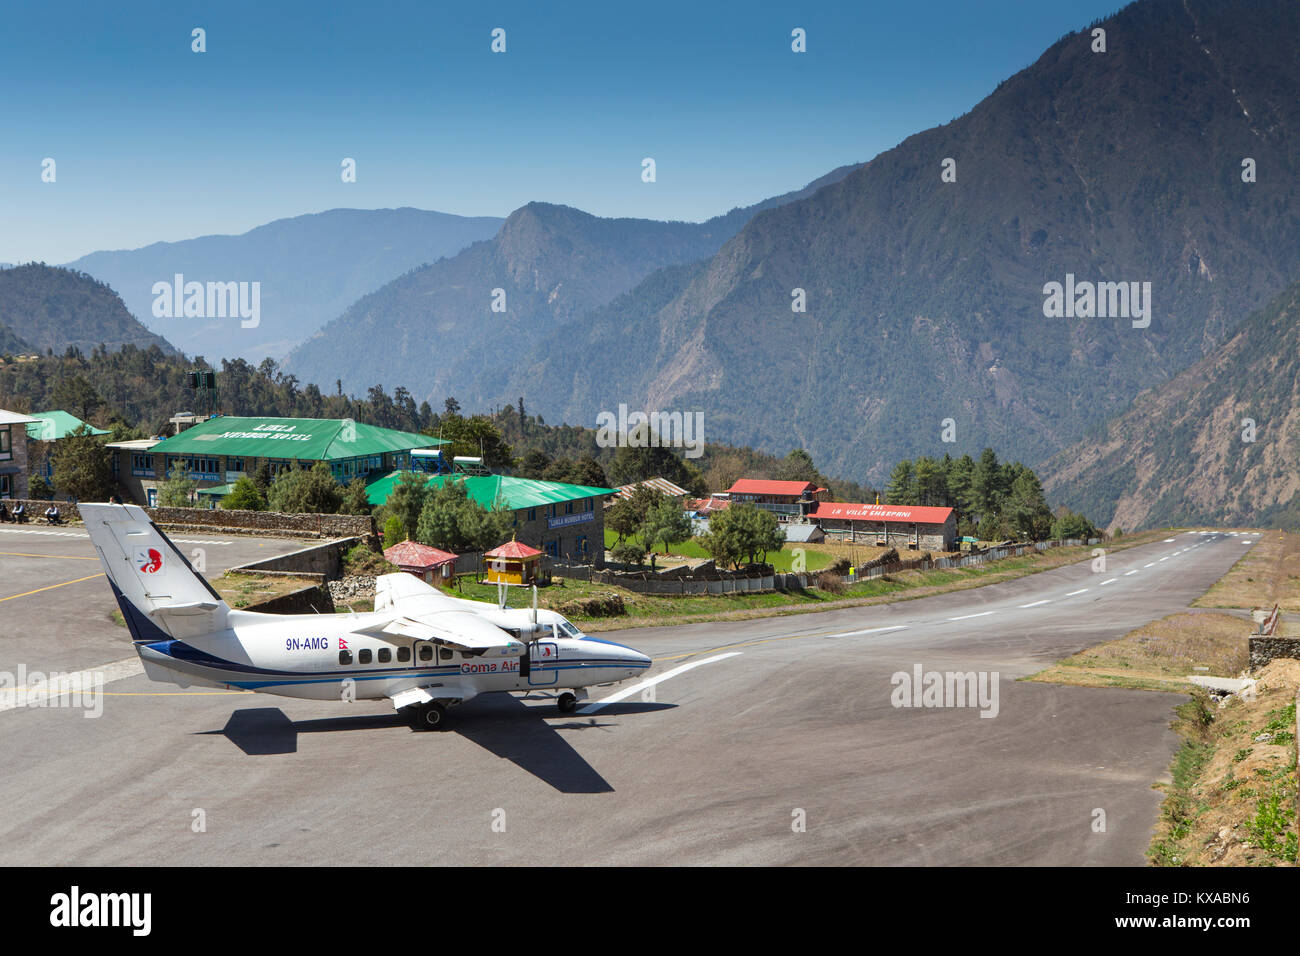 A small airplane is taking off from the famous airport of Lukla in the Nepalese Himalaya. Stock Photo